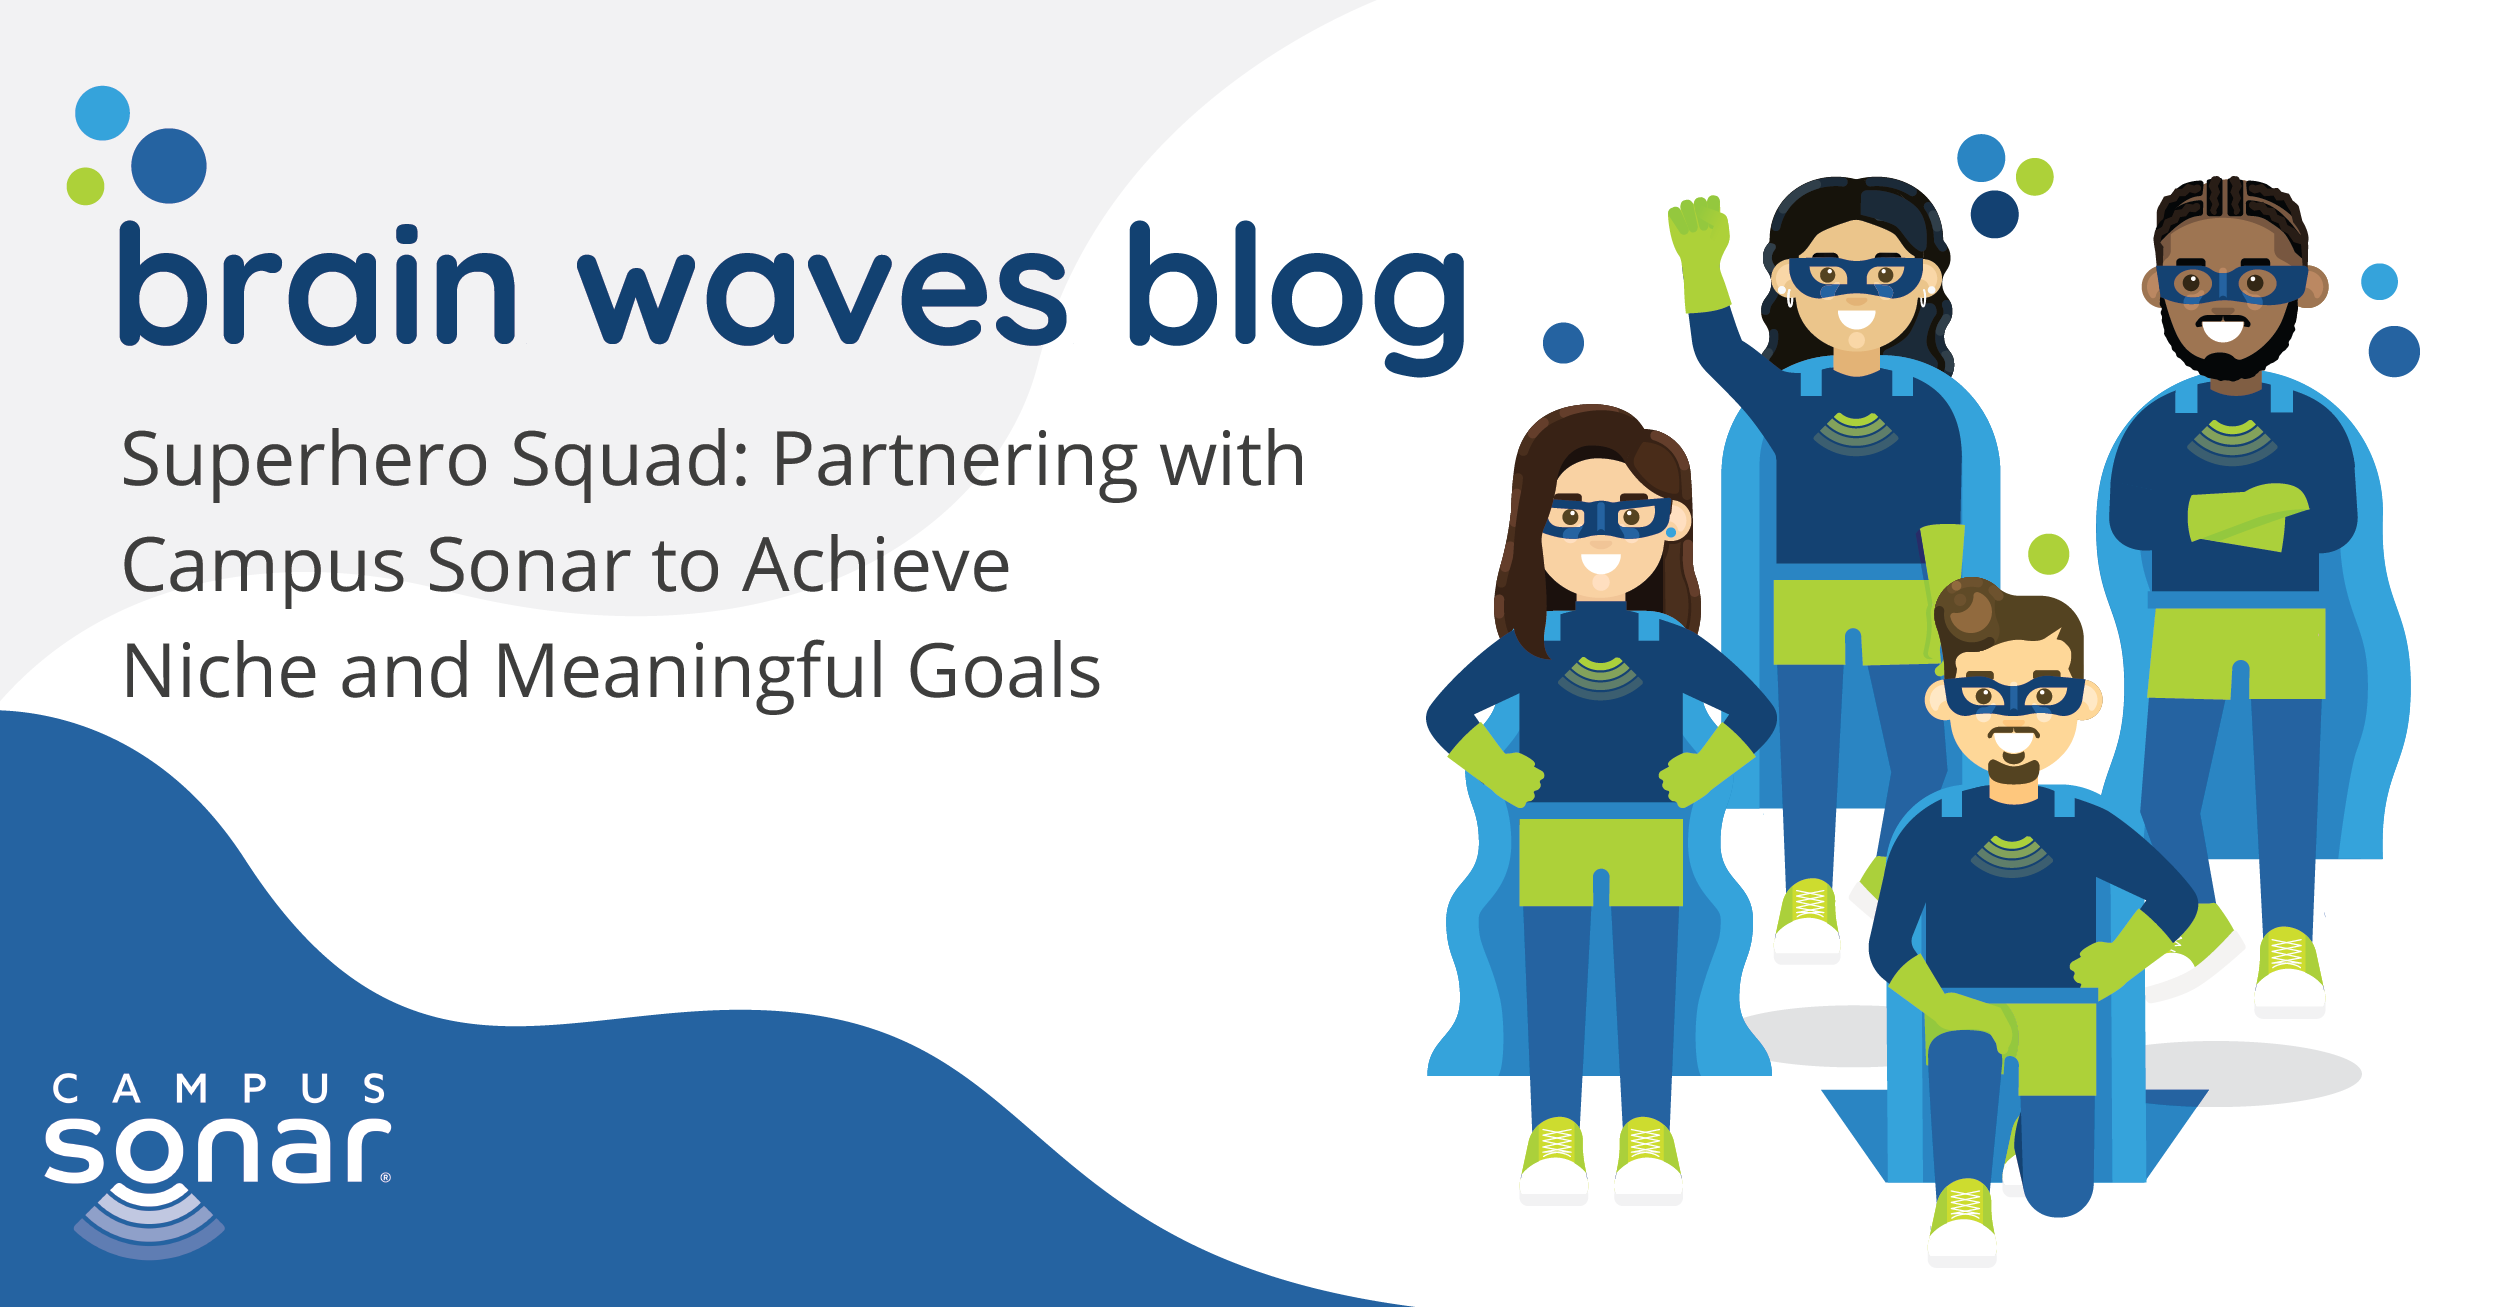 Brain Waves Blog Superhero Squad: Partnering with Campus Sonar to Achieve Niche and Meaningful Goals